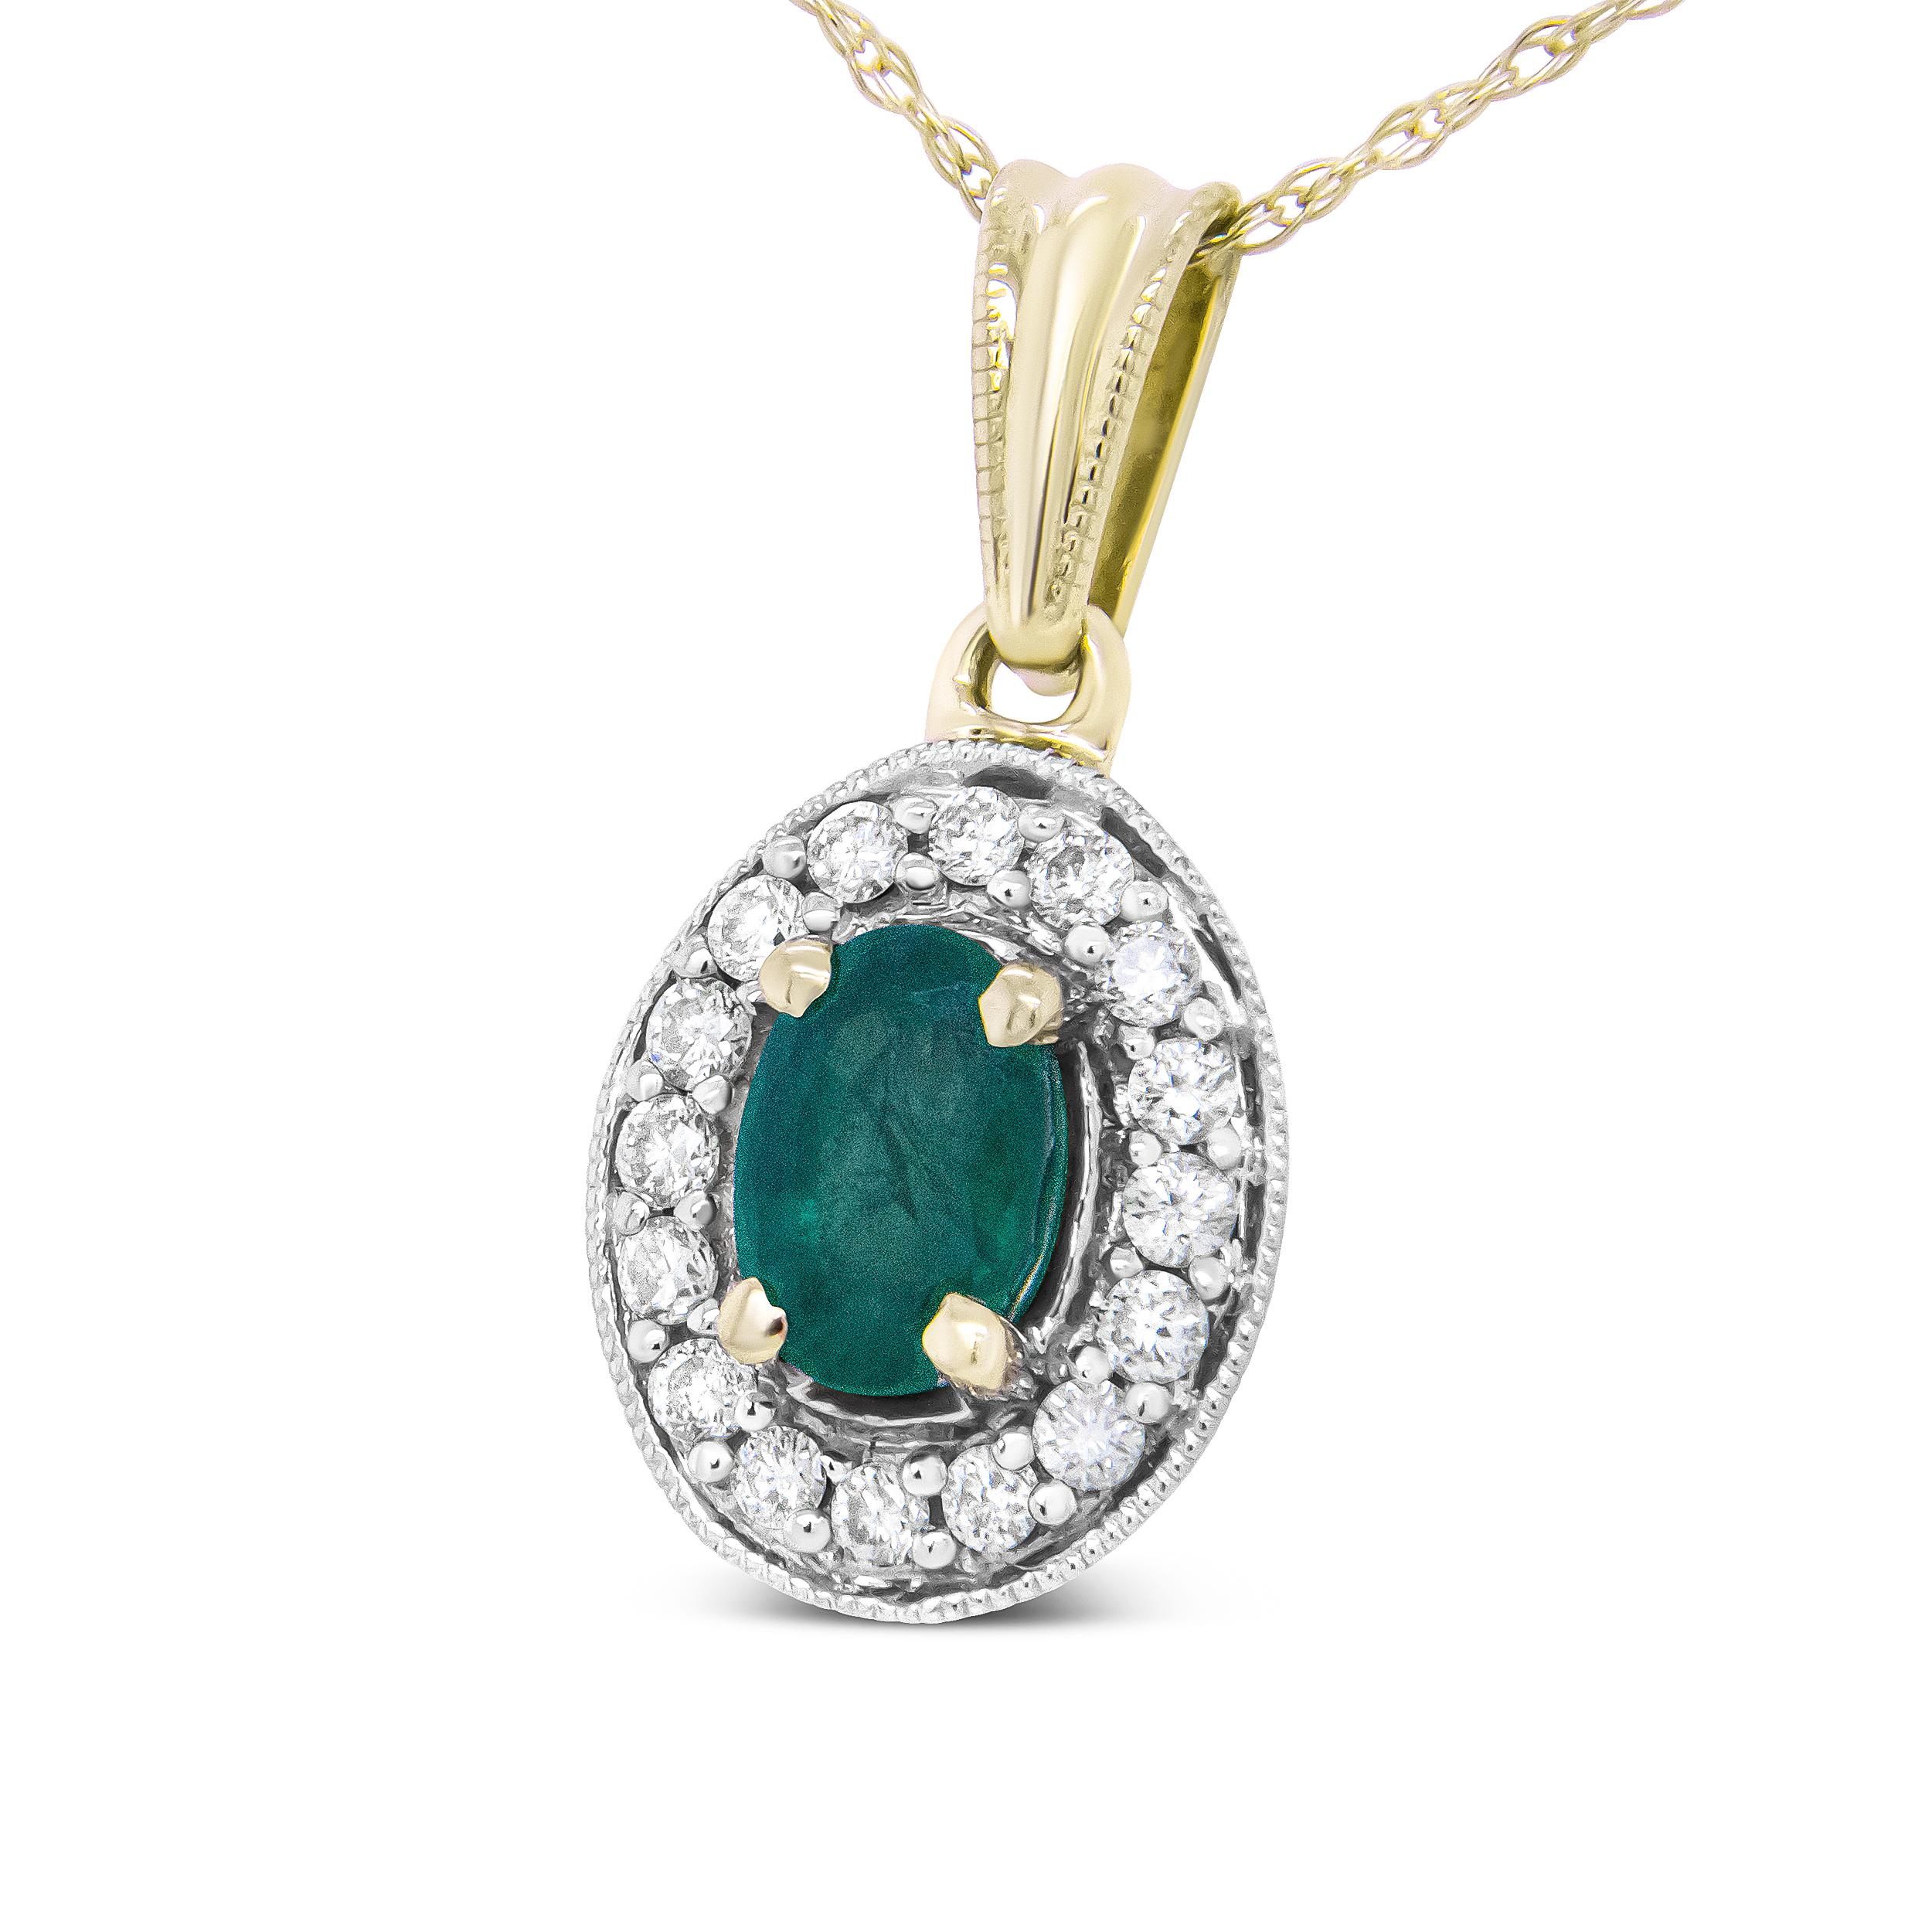 This diamond and emerald pendant necklace will turn heads with its classy elegance and lovely sparkle. Nestled at the center in a prong setting is a 6x4mm oval Emerald, a gemstone known as a May birthstone. All around, the dazzle of diamonds creates